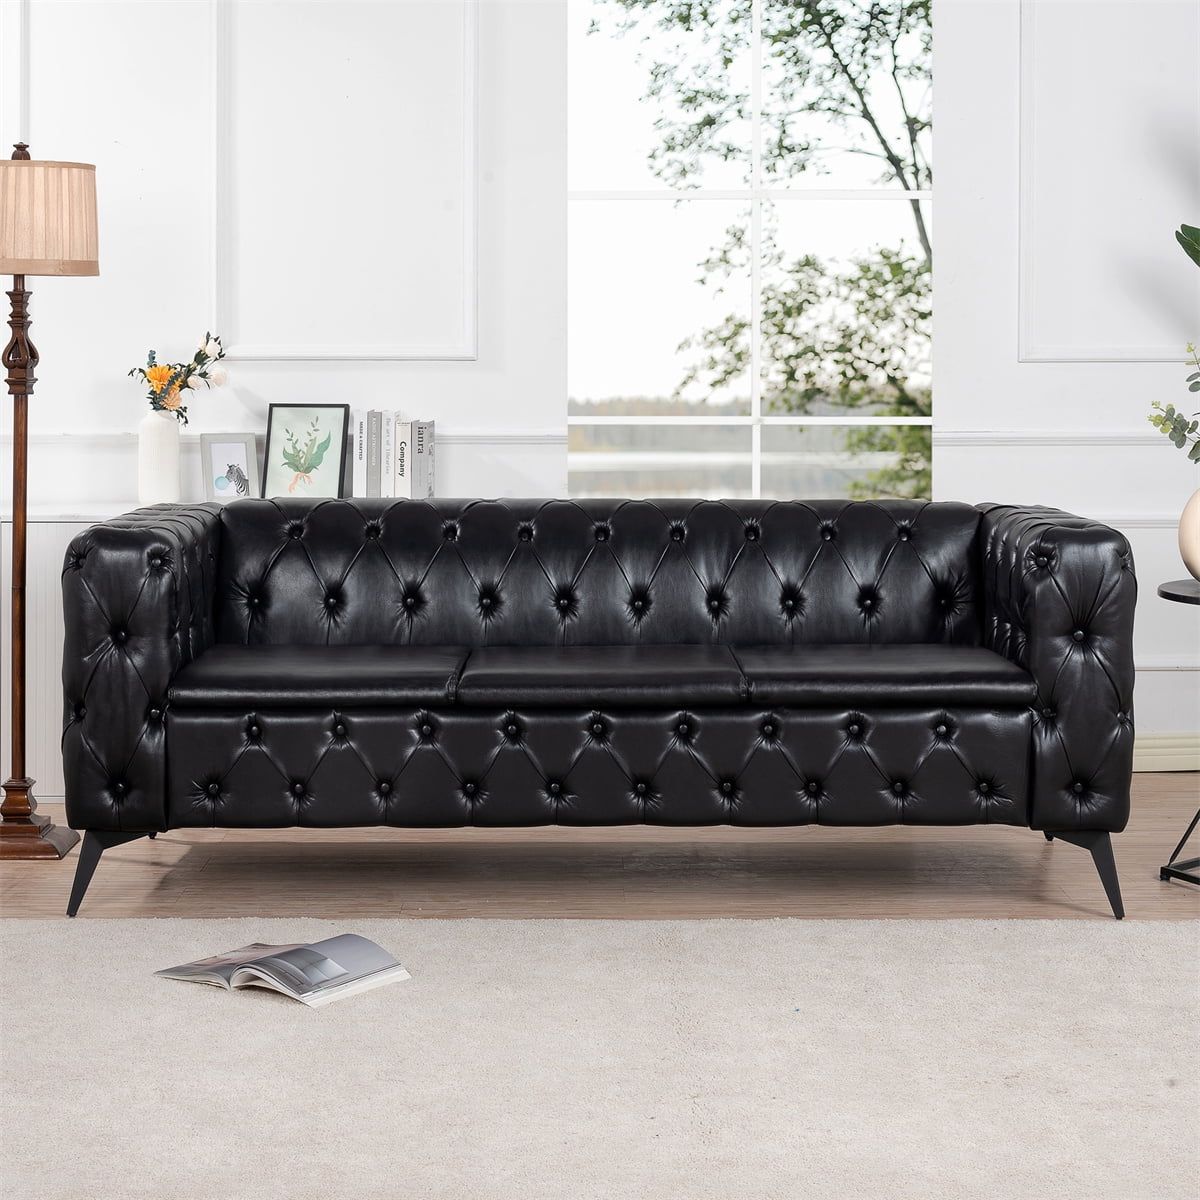 Chesterfield 3 Seater Couch,retro Classic Faux Leather Sofa,upholstered 3  Seater Sofa With Removable Cushions,button Tufted Large Sofa With Metal  Legs And Square Arms For Living Room Office,black – Walmart For Traditional 3 Seater Faux Leather Sofas (View 15 of 15)